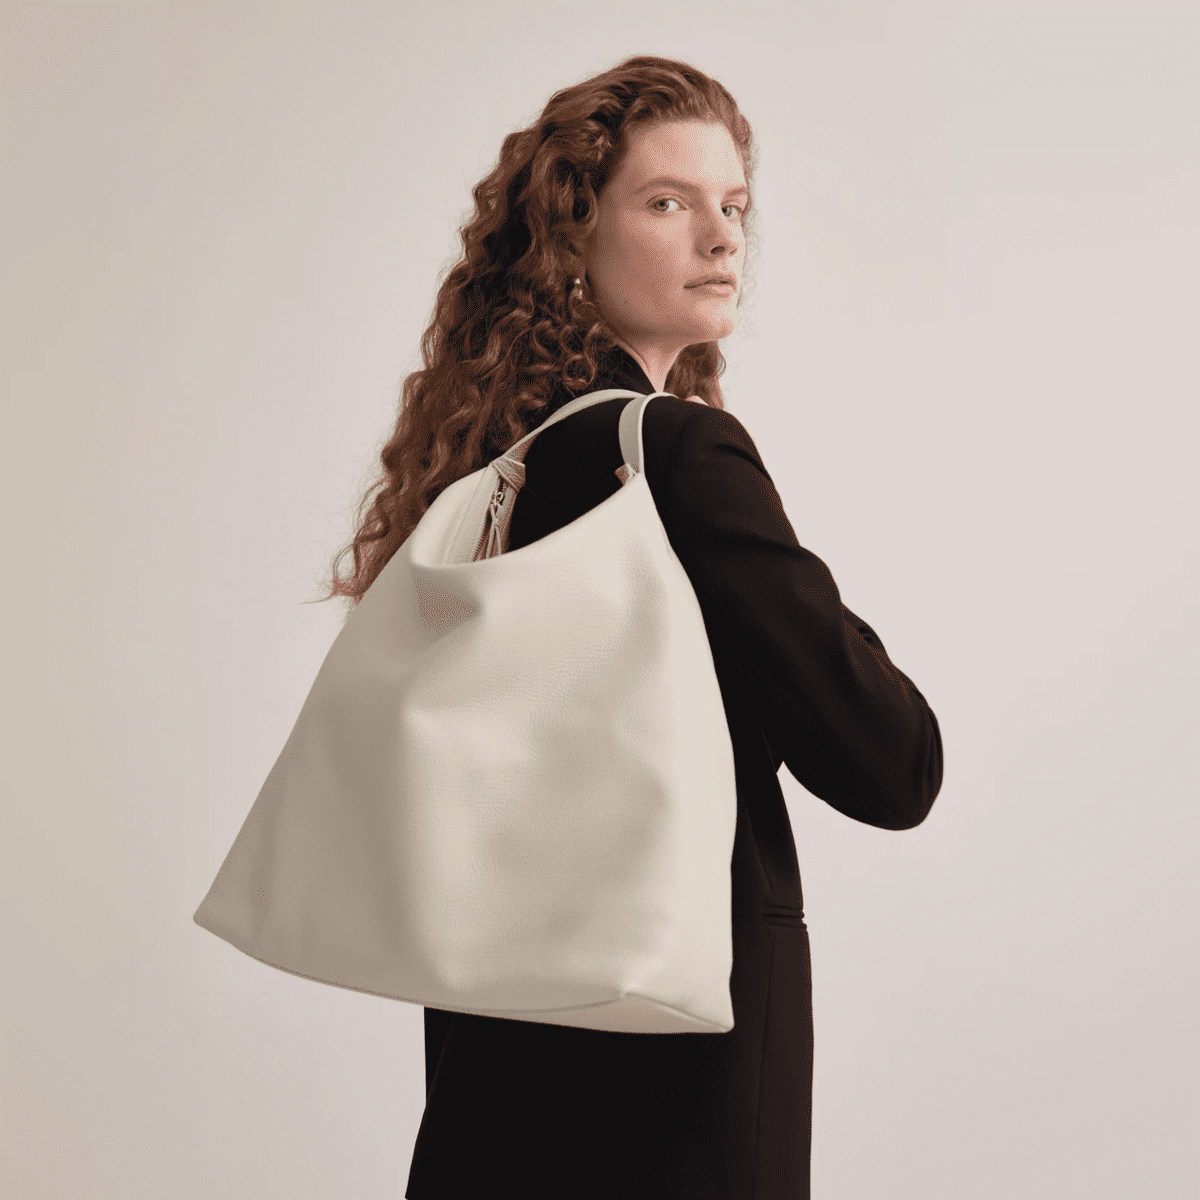 Everlane Just Launched the Boss Bag, a 